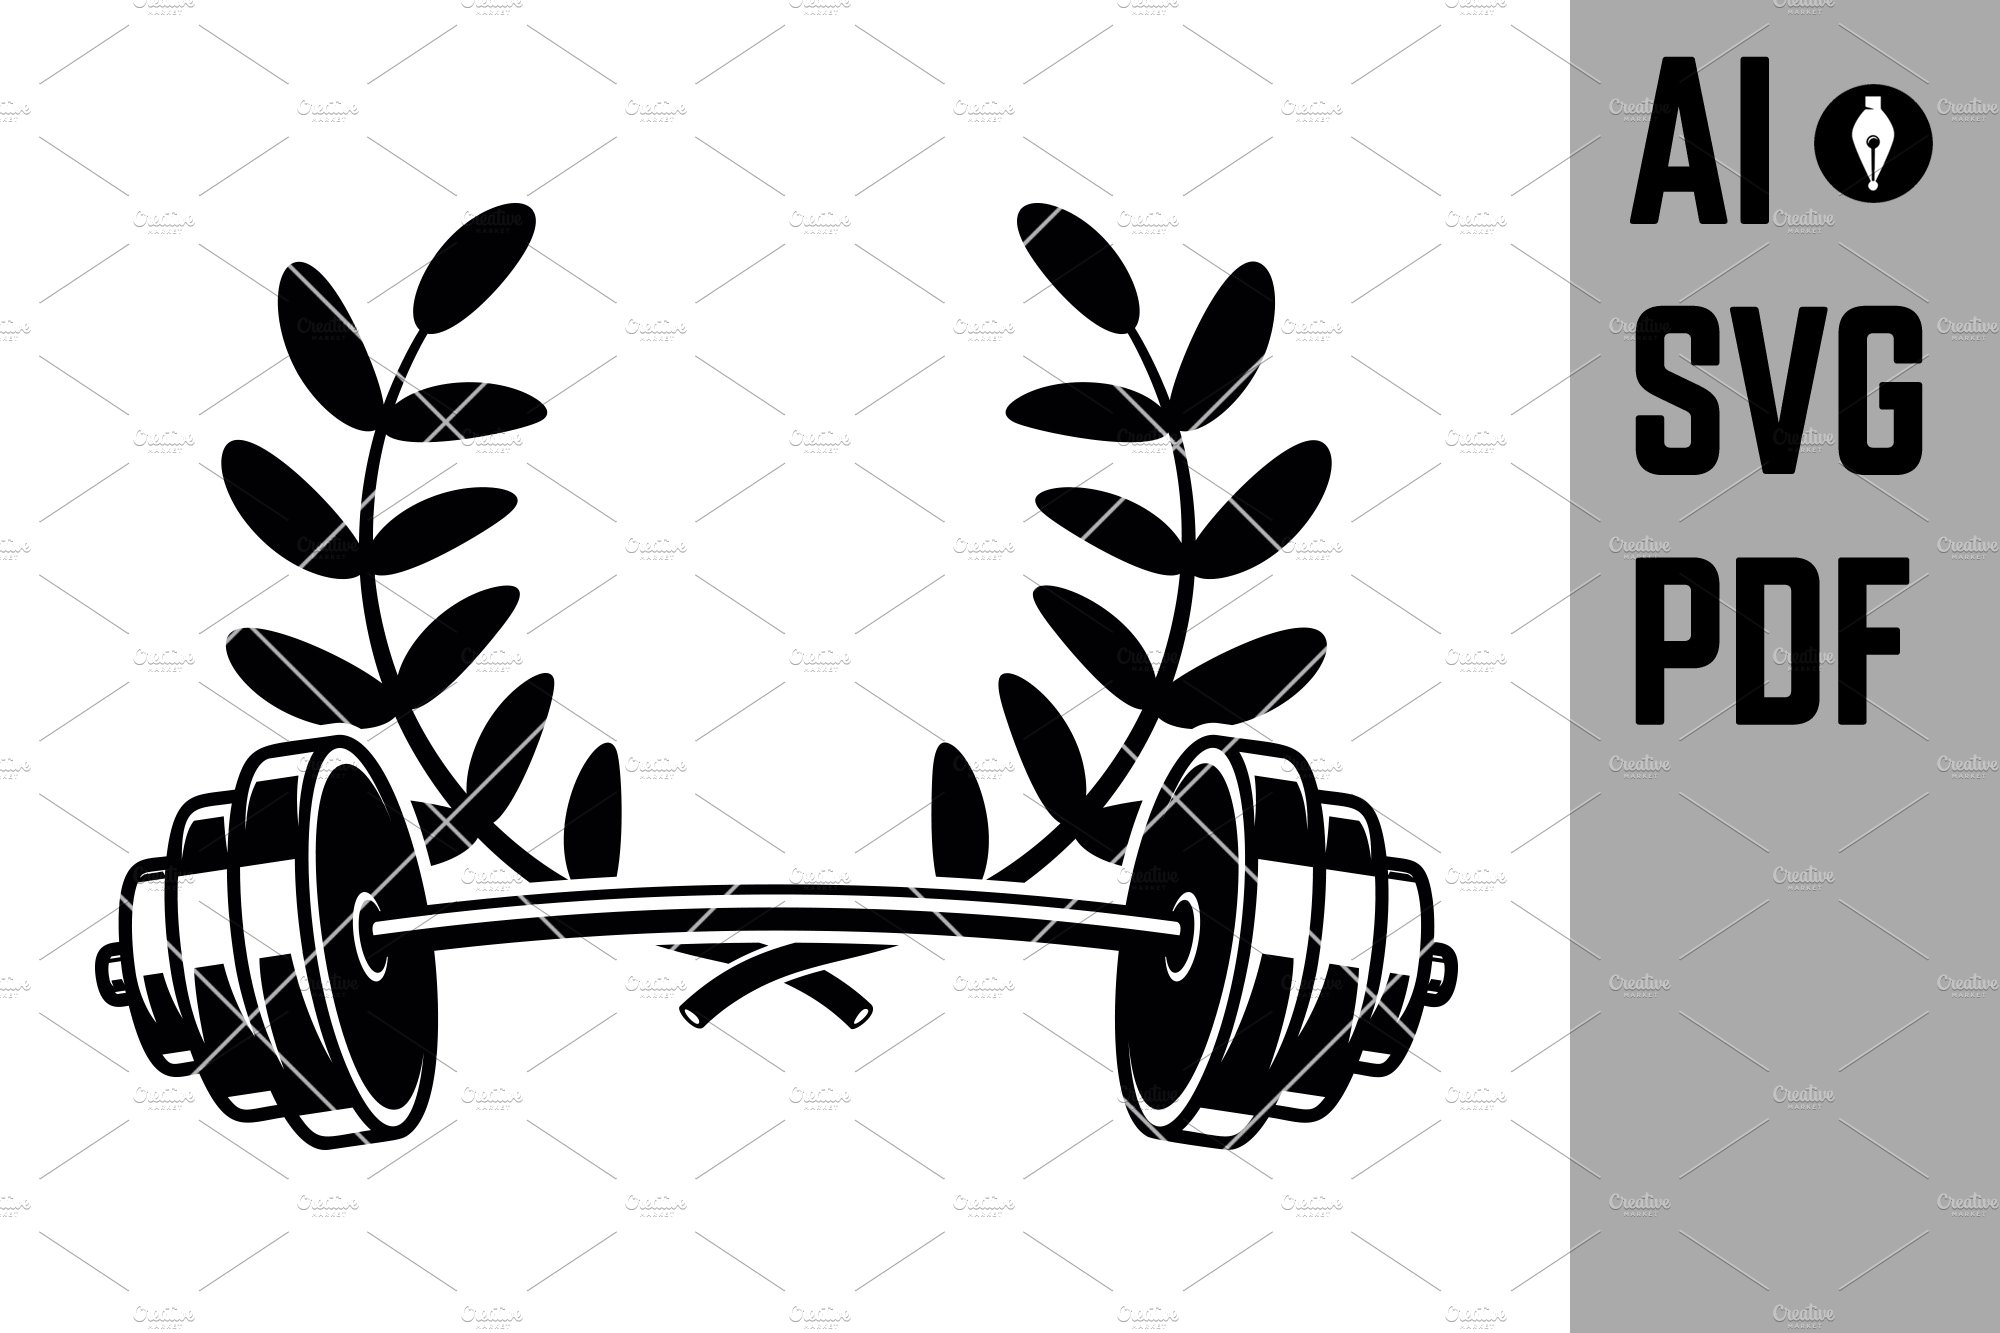 Emblem template with barbell cover image.